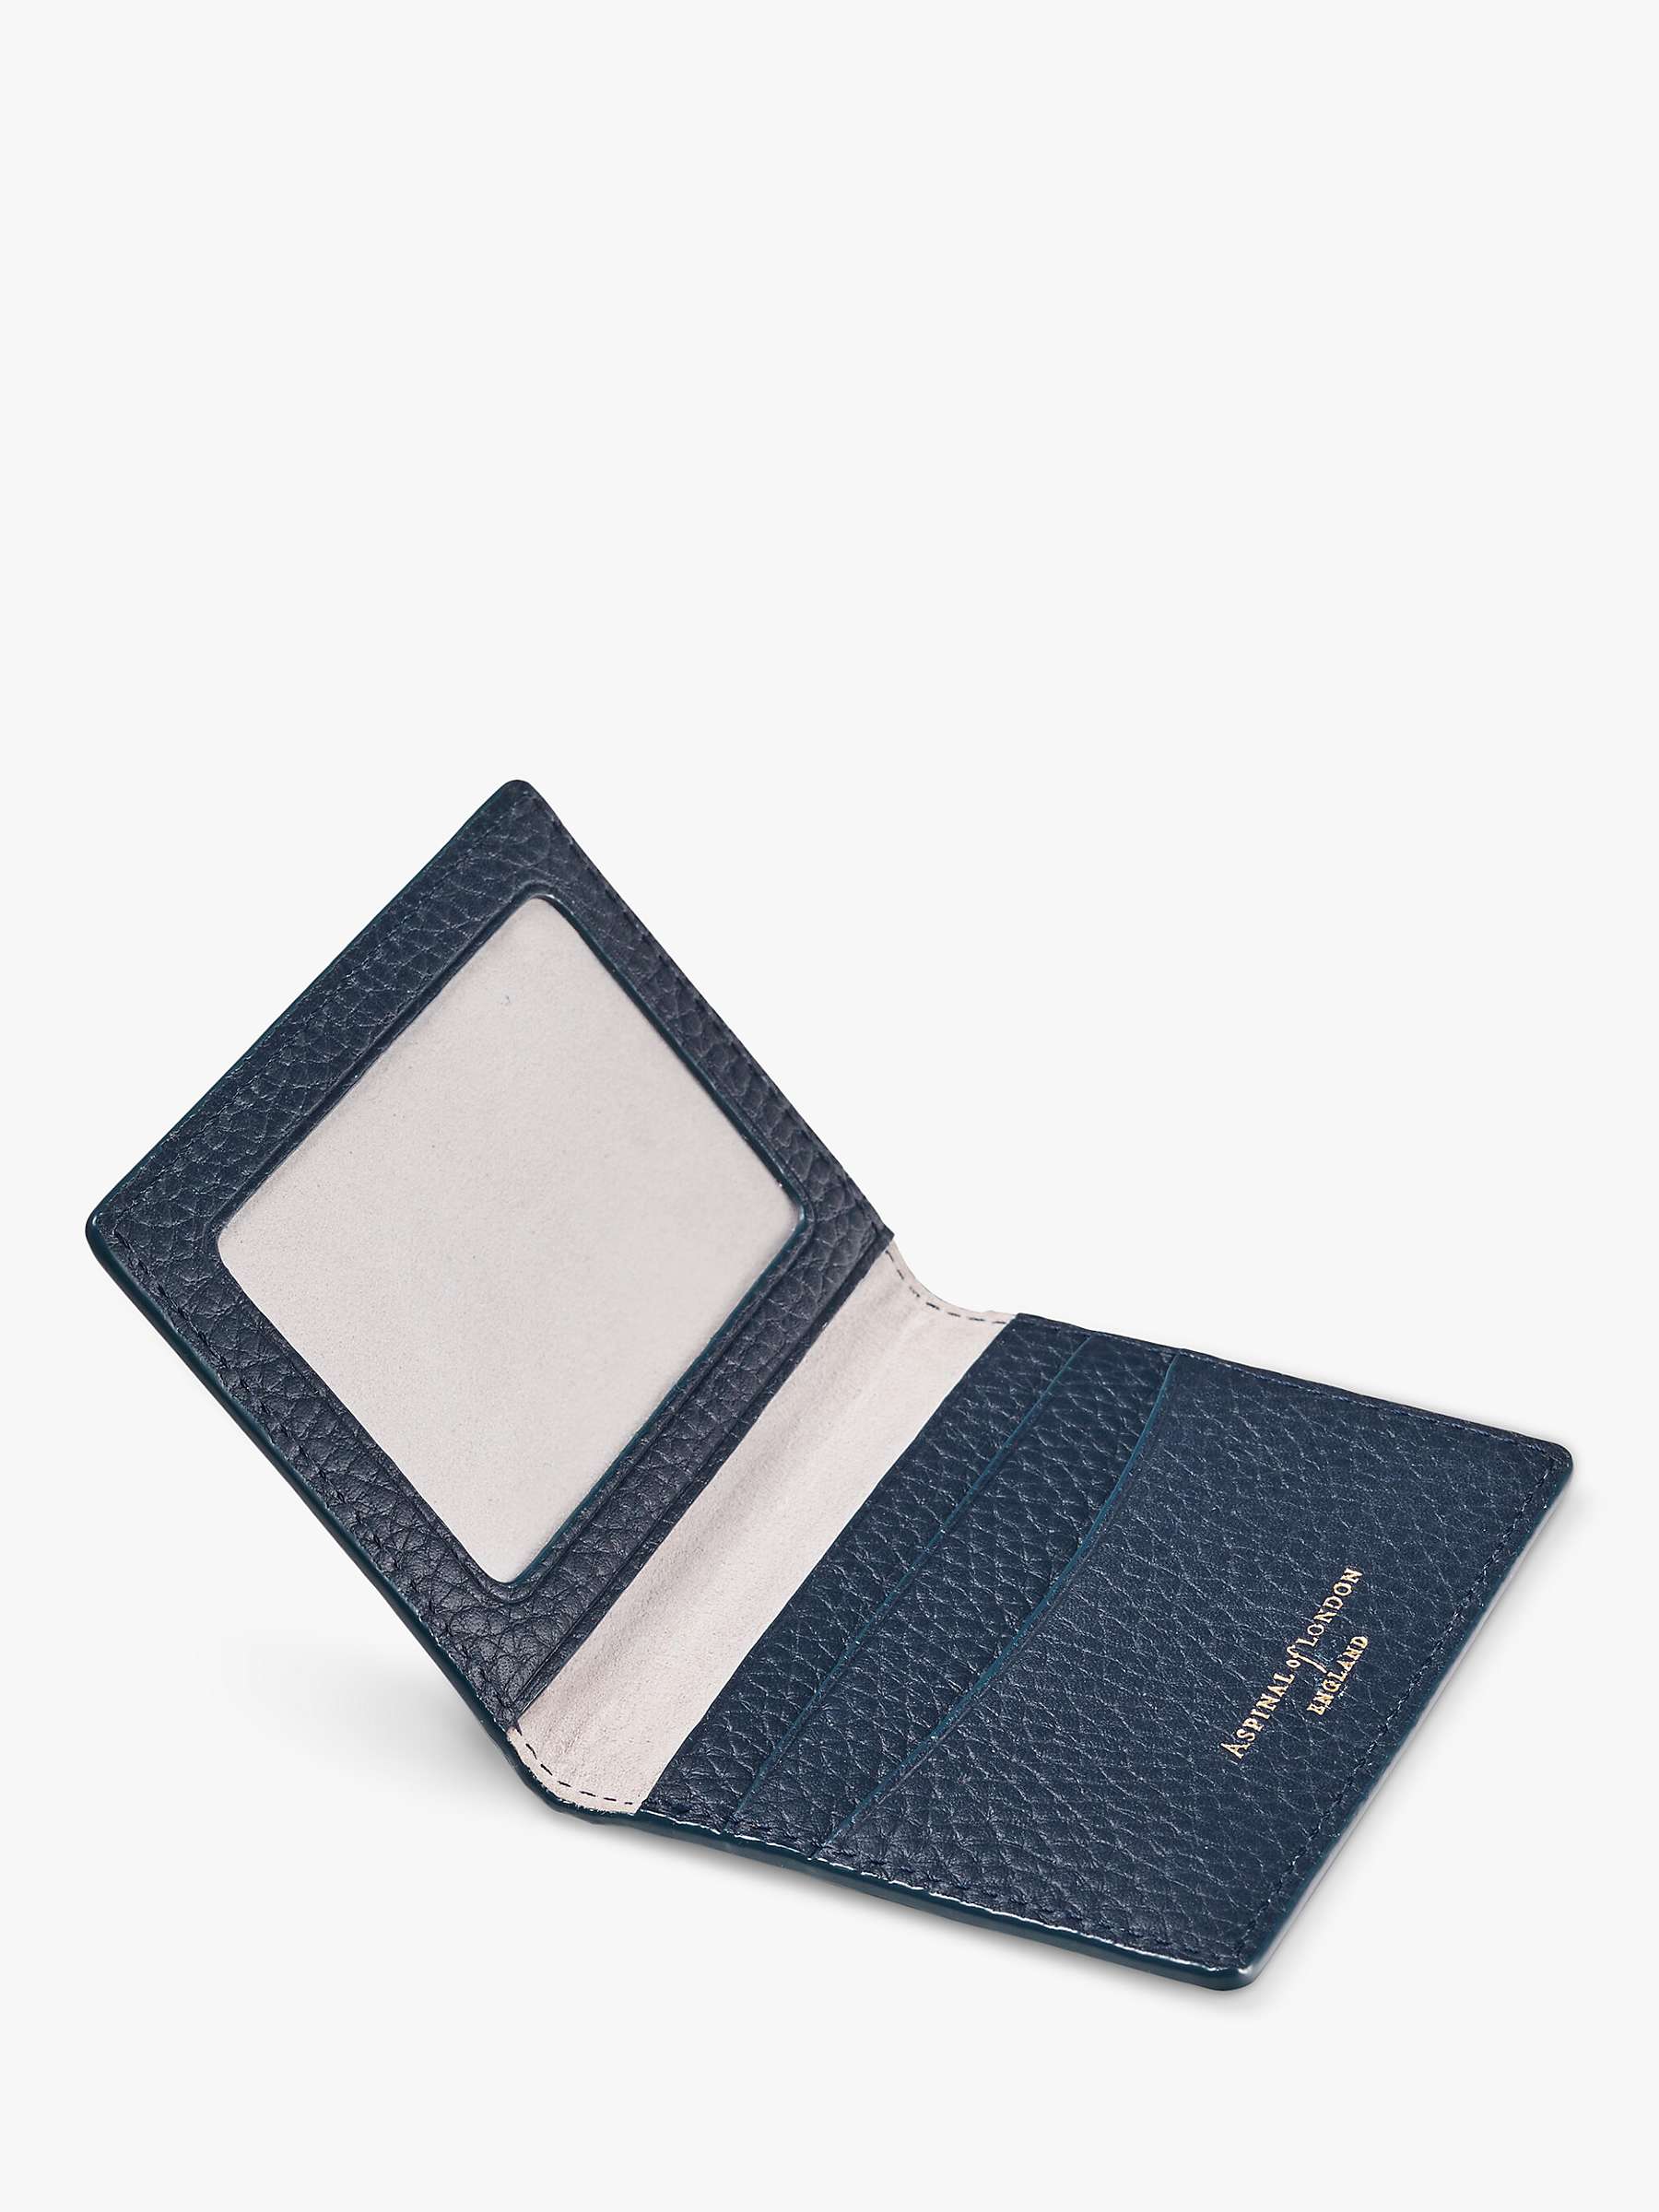 Buy Aspinal of London ID and Travel Card Holder Online at johnlewis.com